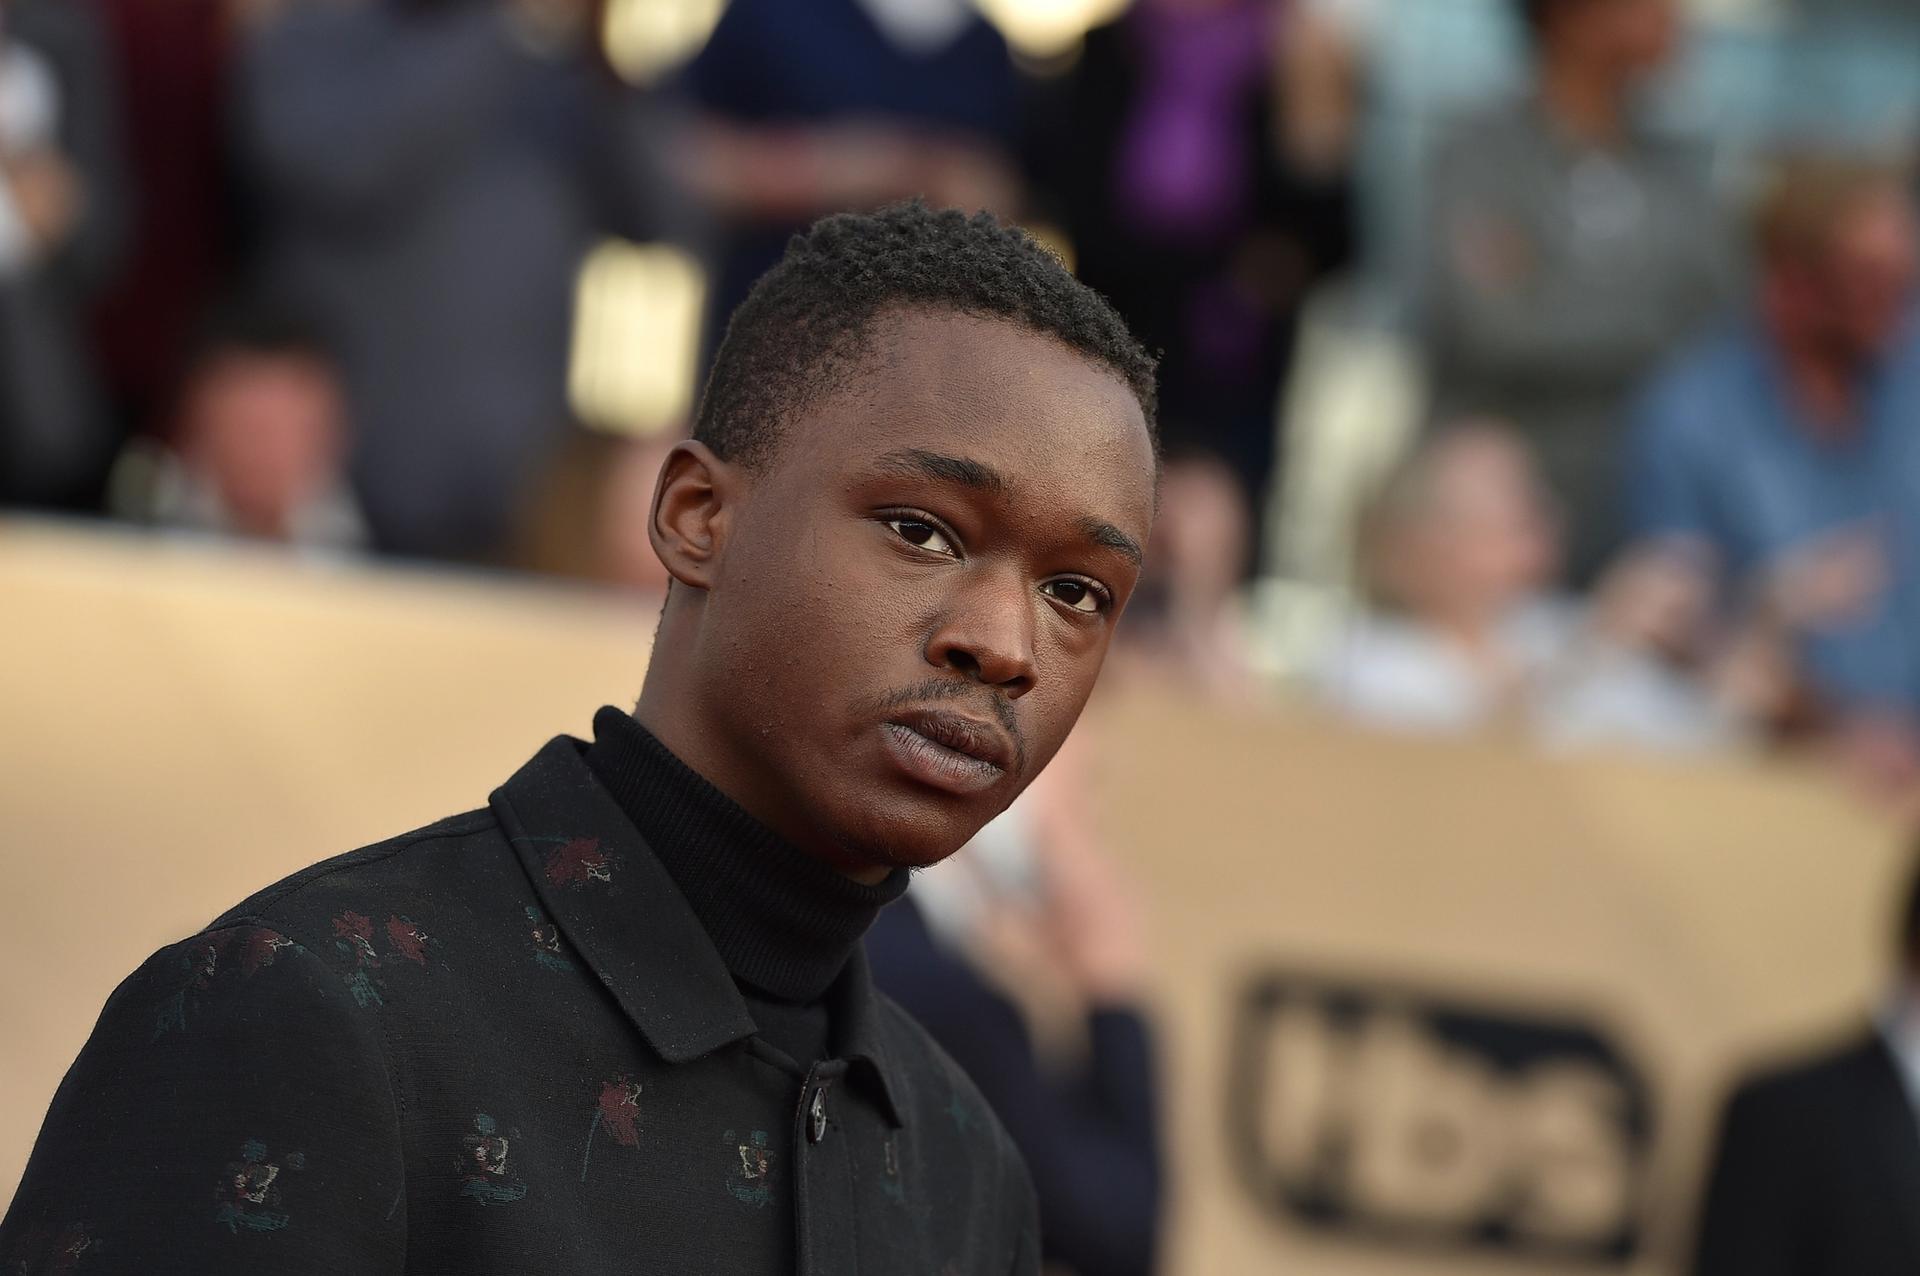 Ashton Sanders at the 2017 Screen Actors Guild Awards Photo by Jordan Strauss/Invision/AP